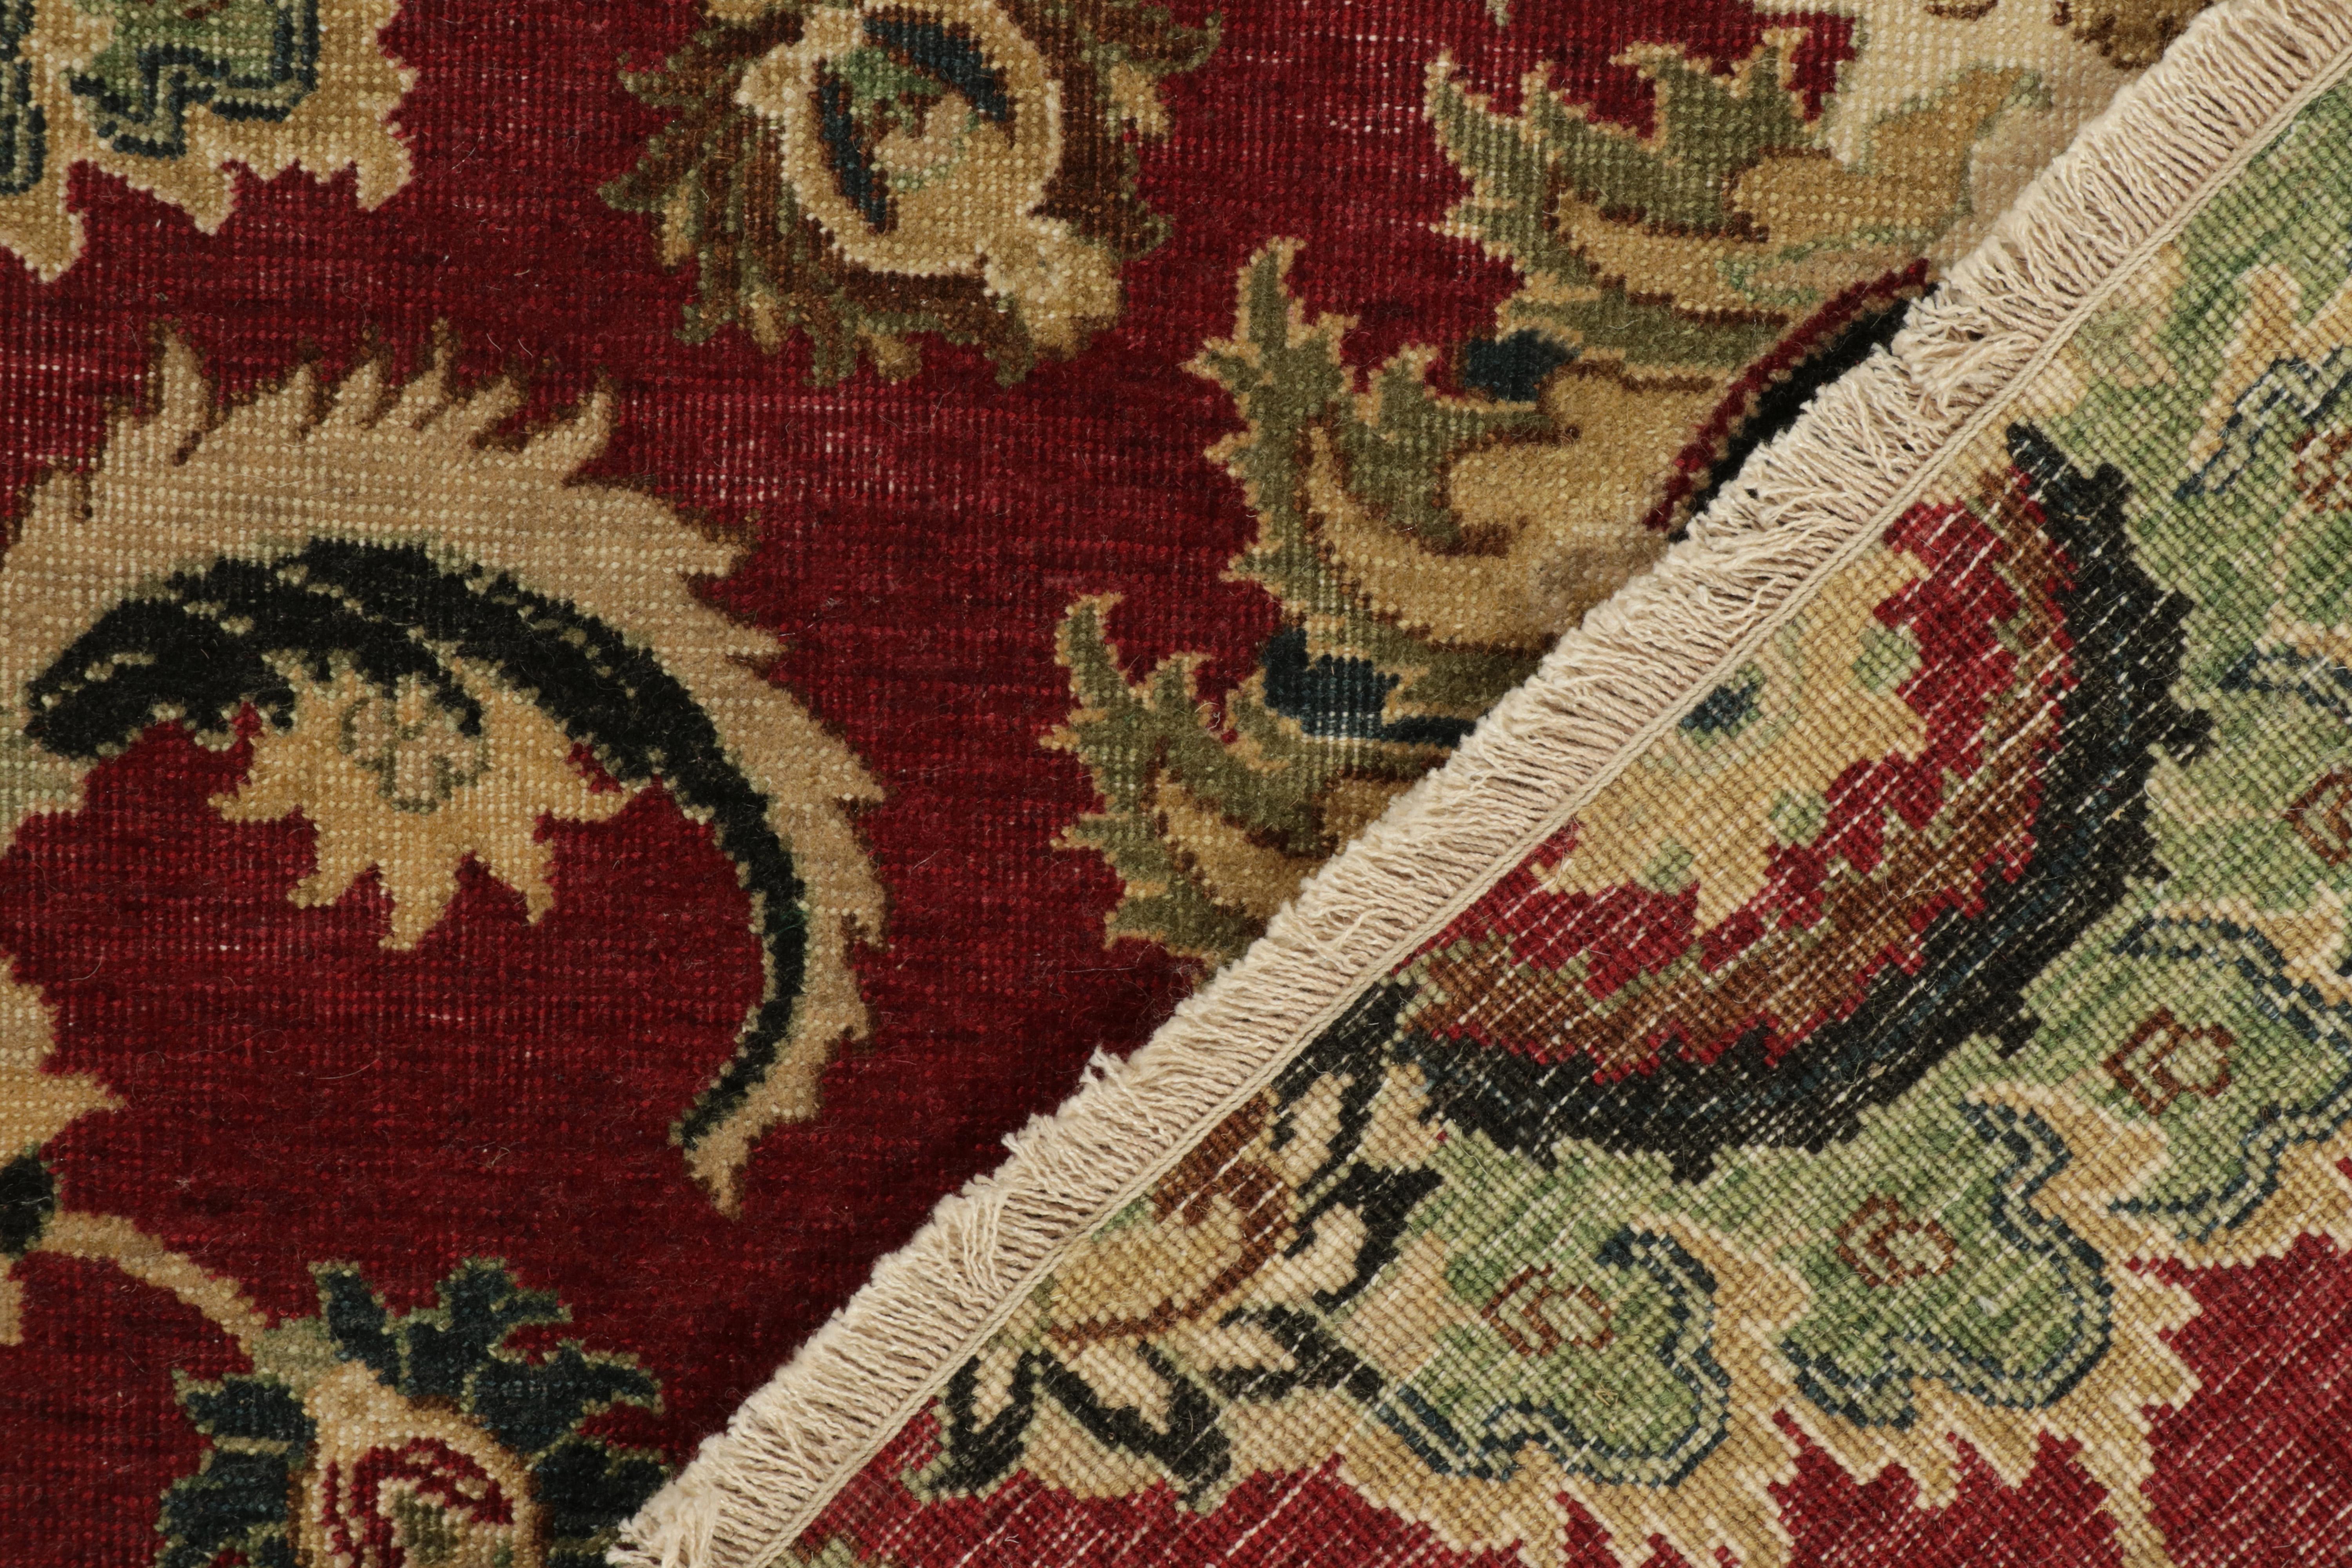 Wool Rug & Kilim's 17th-Century Inspired Rug in Burgundy, Gold & Green Florals For Sale